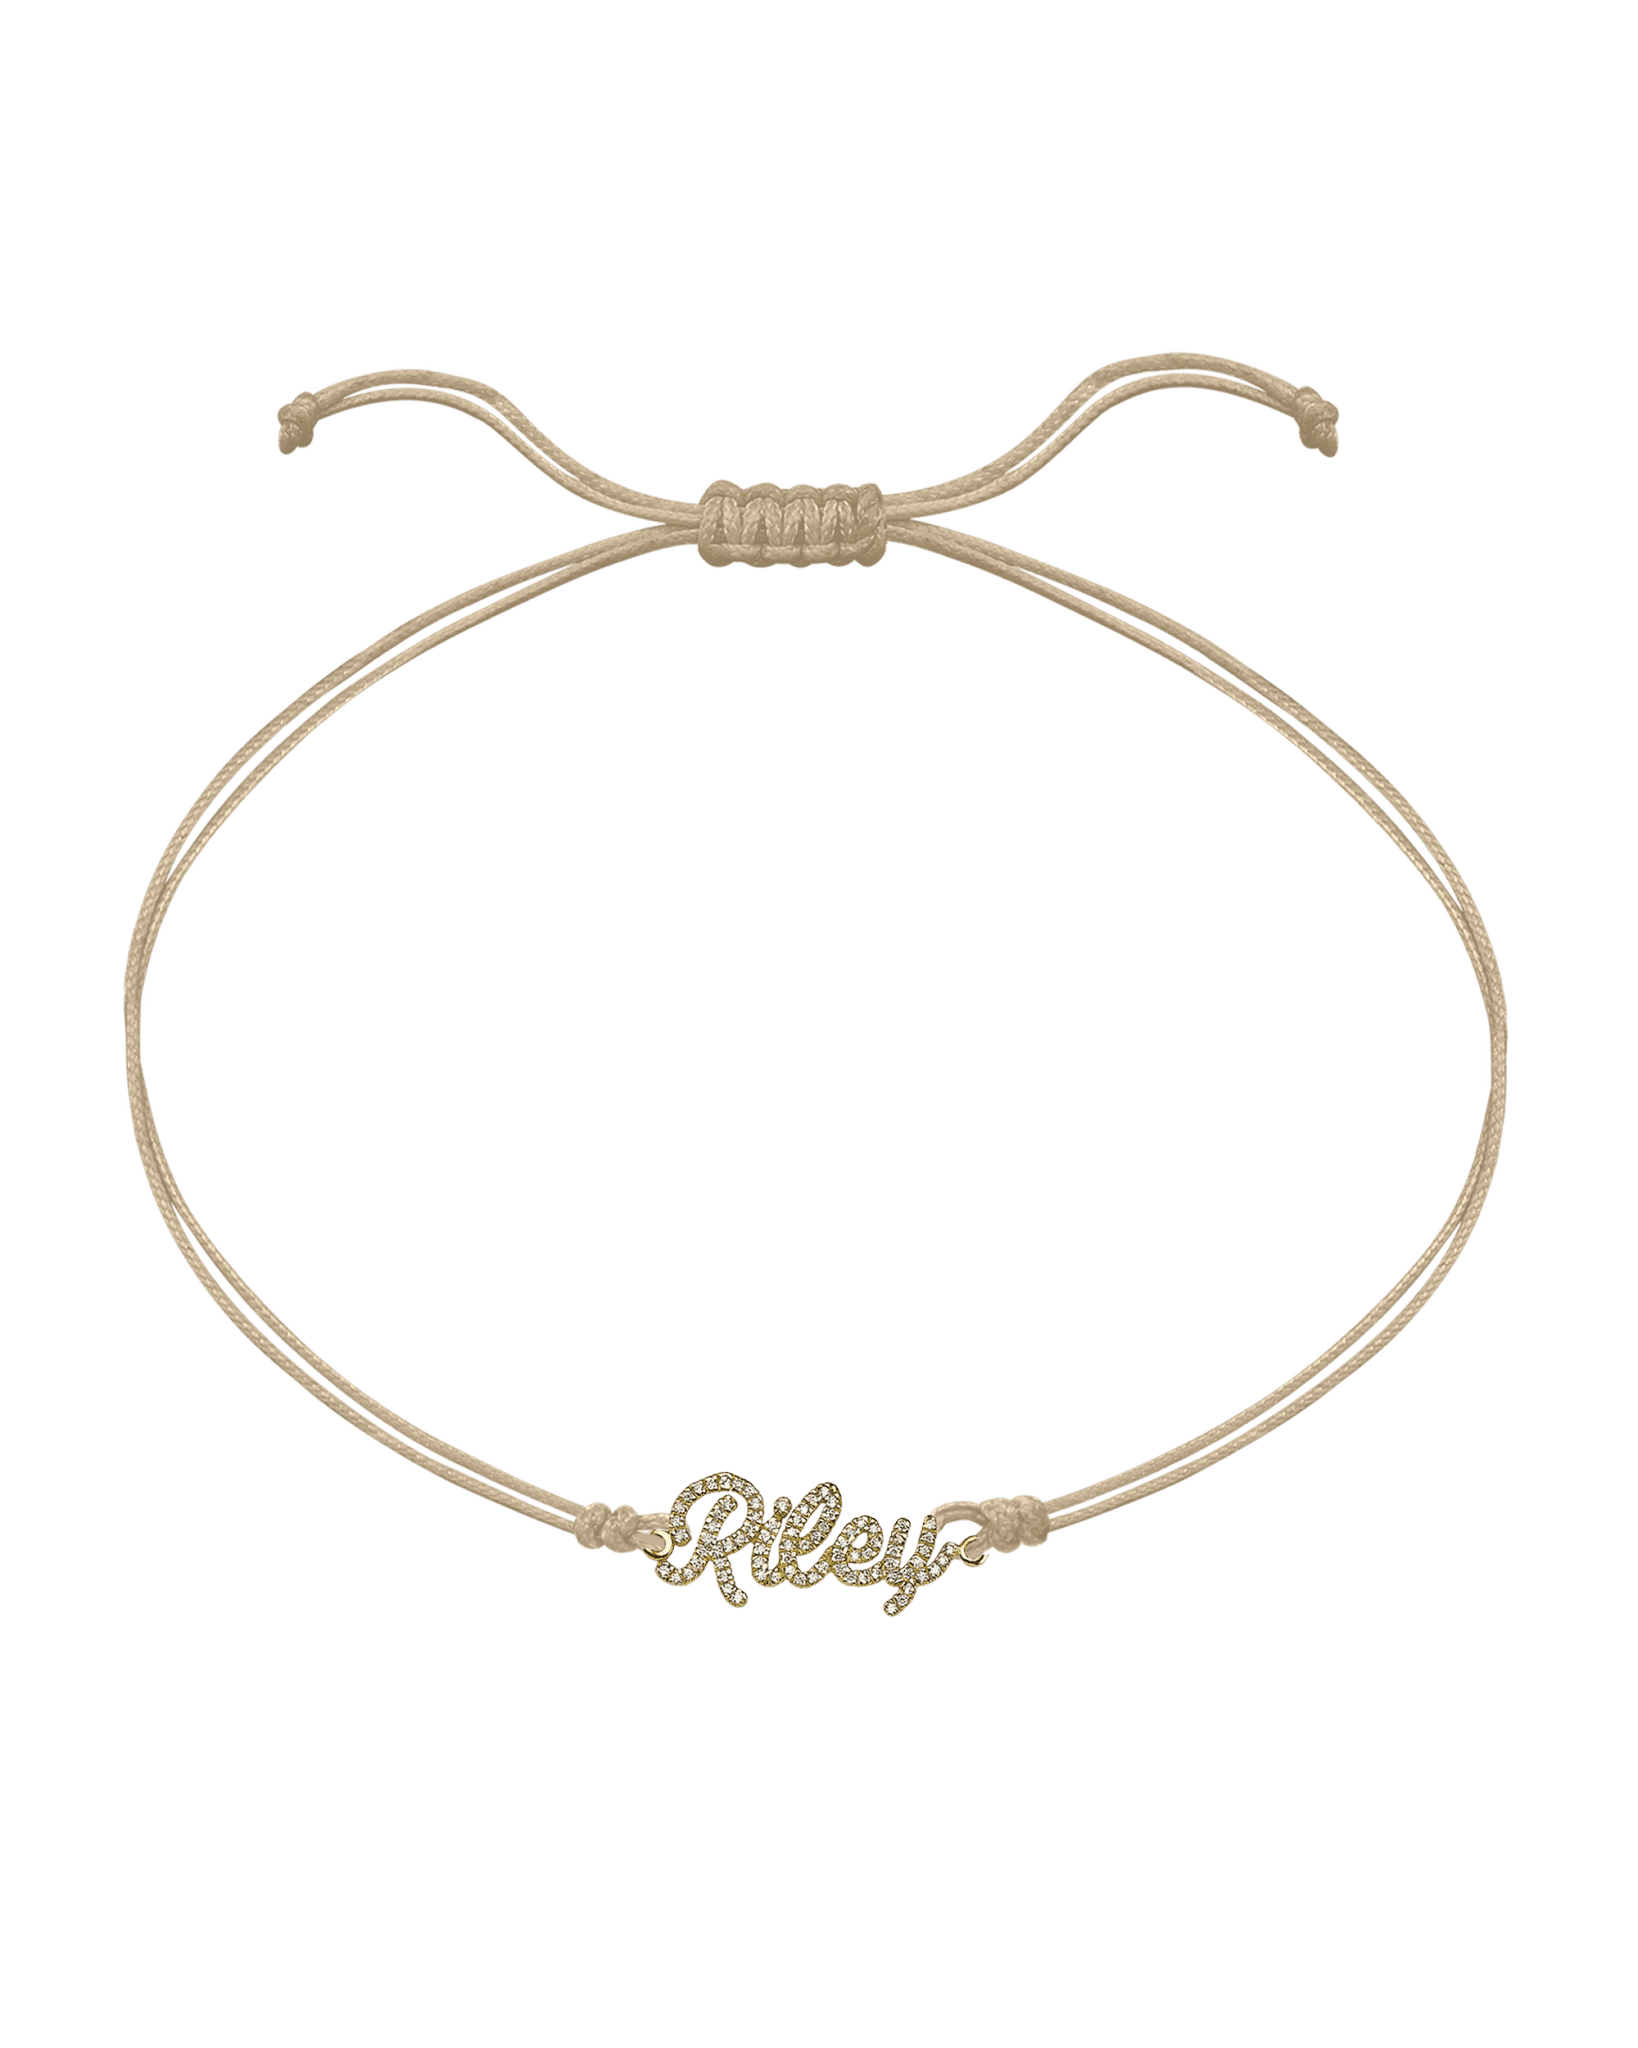 Paved Name Plate String of Love - 14K Yellow Gold Bracelet 14K Solid Gold Sand 1 